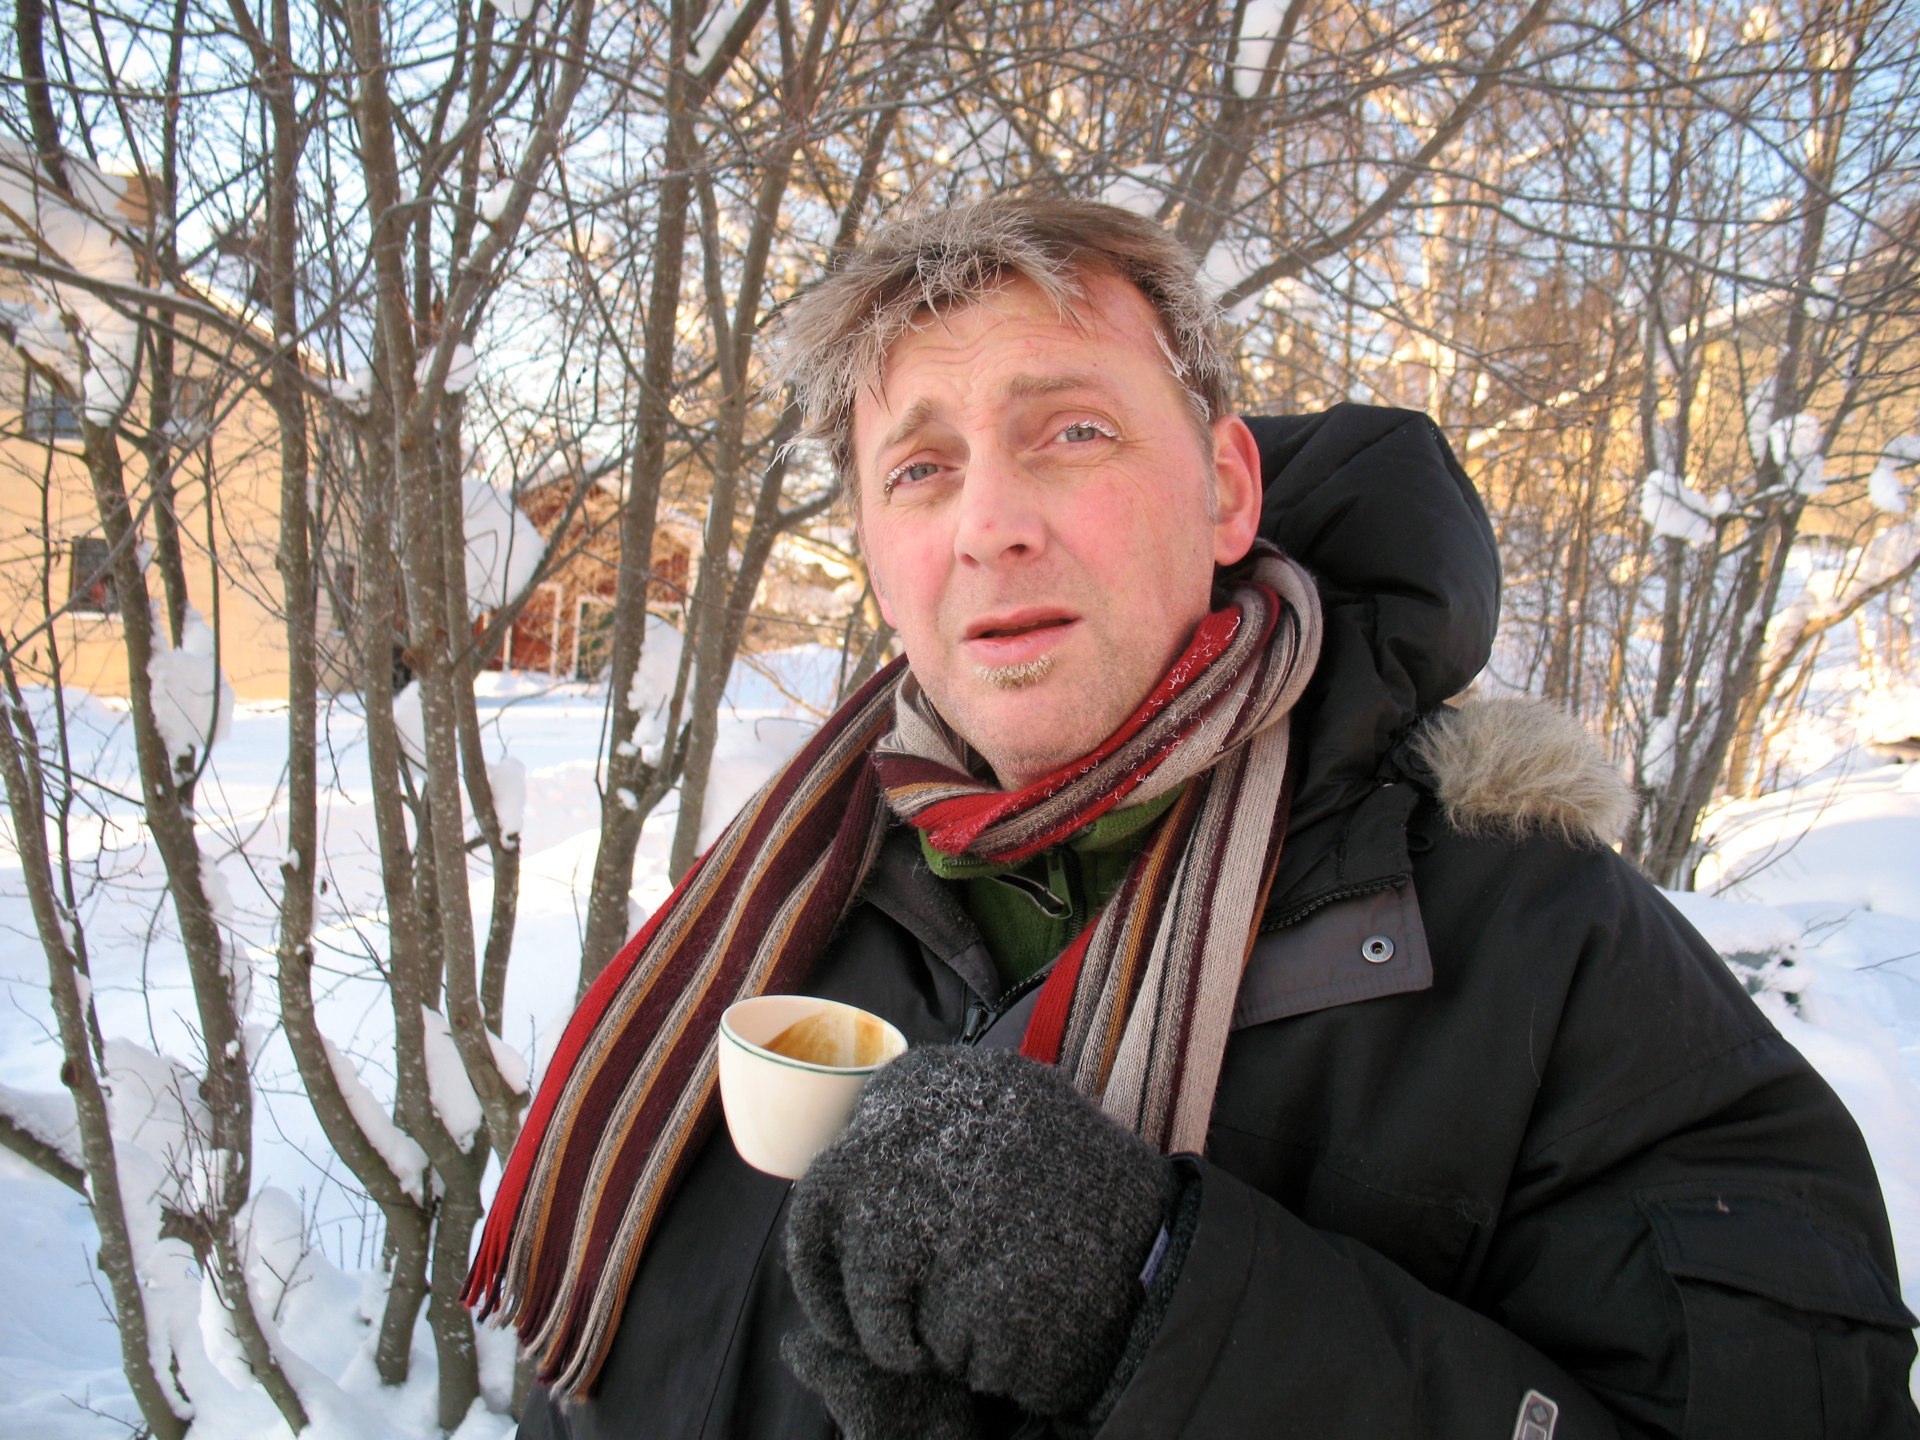 Composer Johan Ramstrom with espresso in -24 celsius.